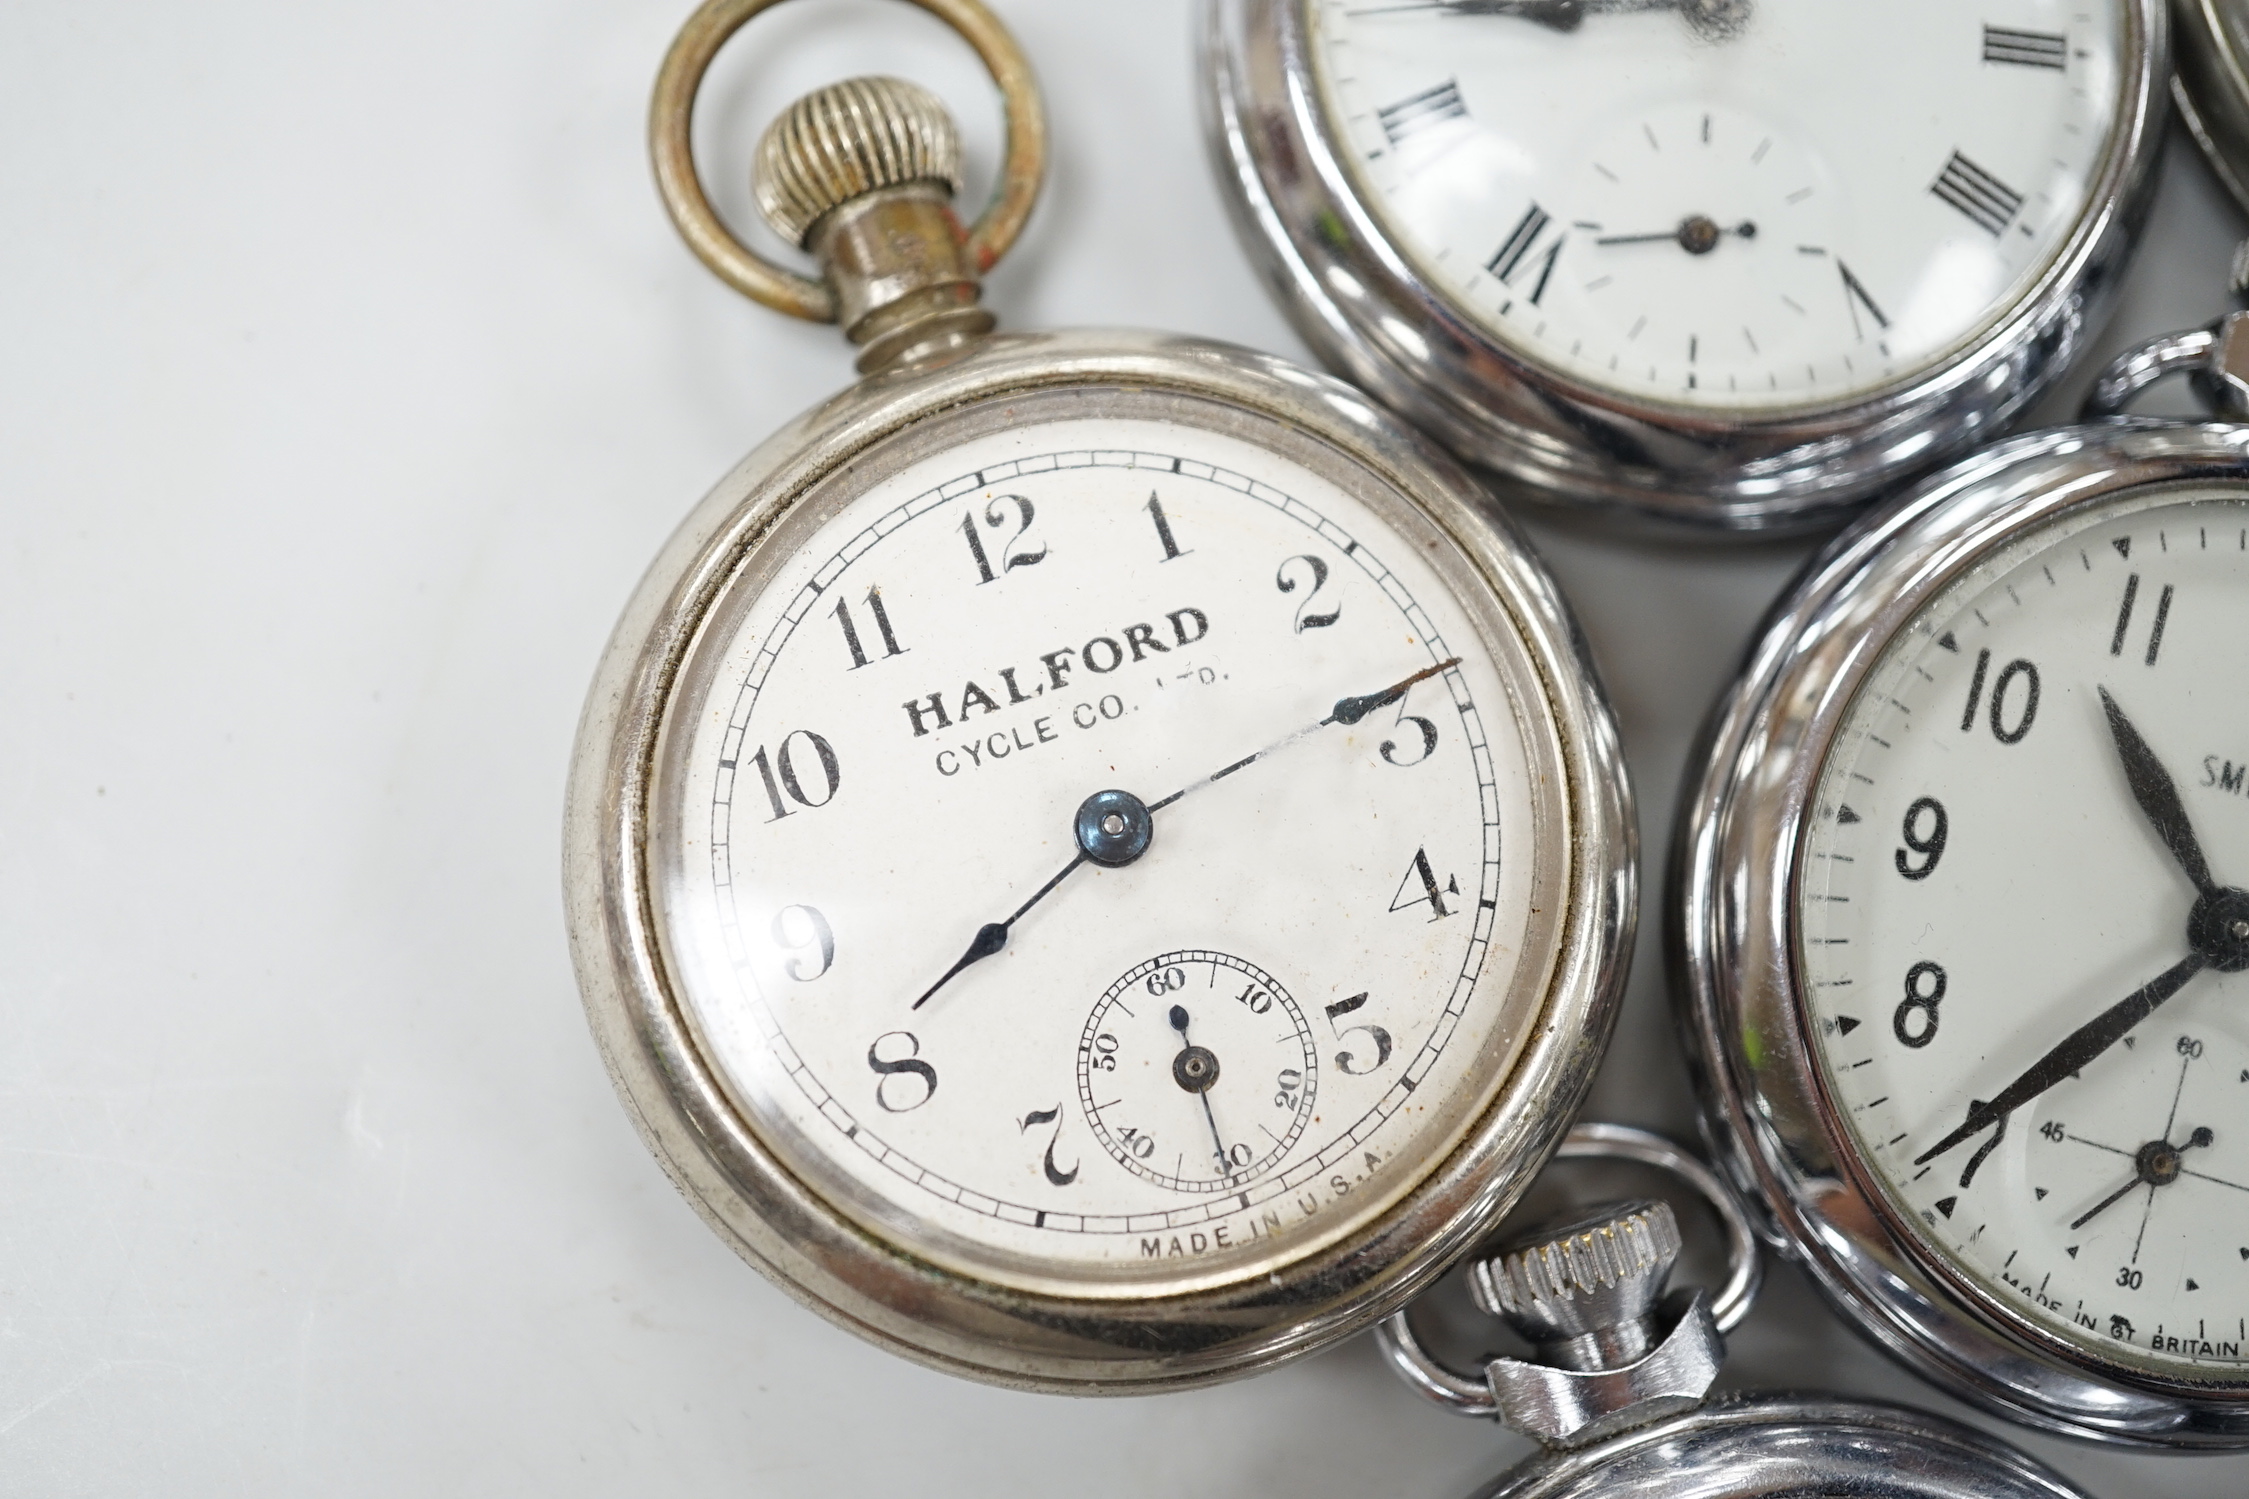 Ten assorted base metal pocket watches including Ingersoll and Smiths.